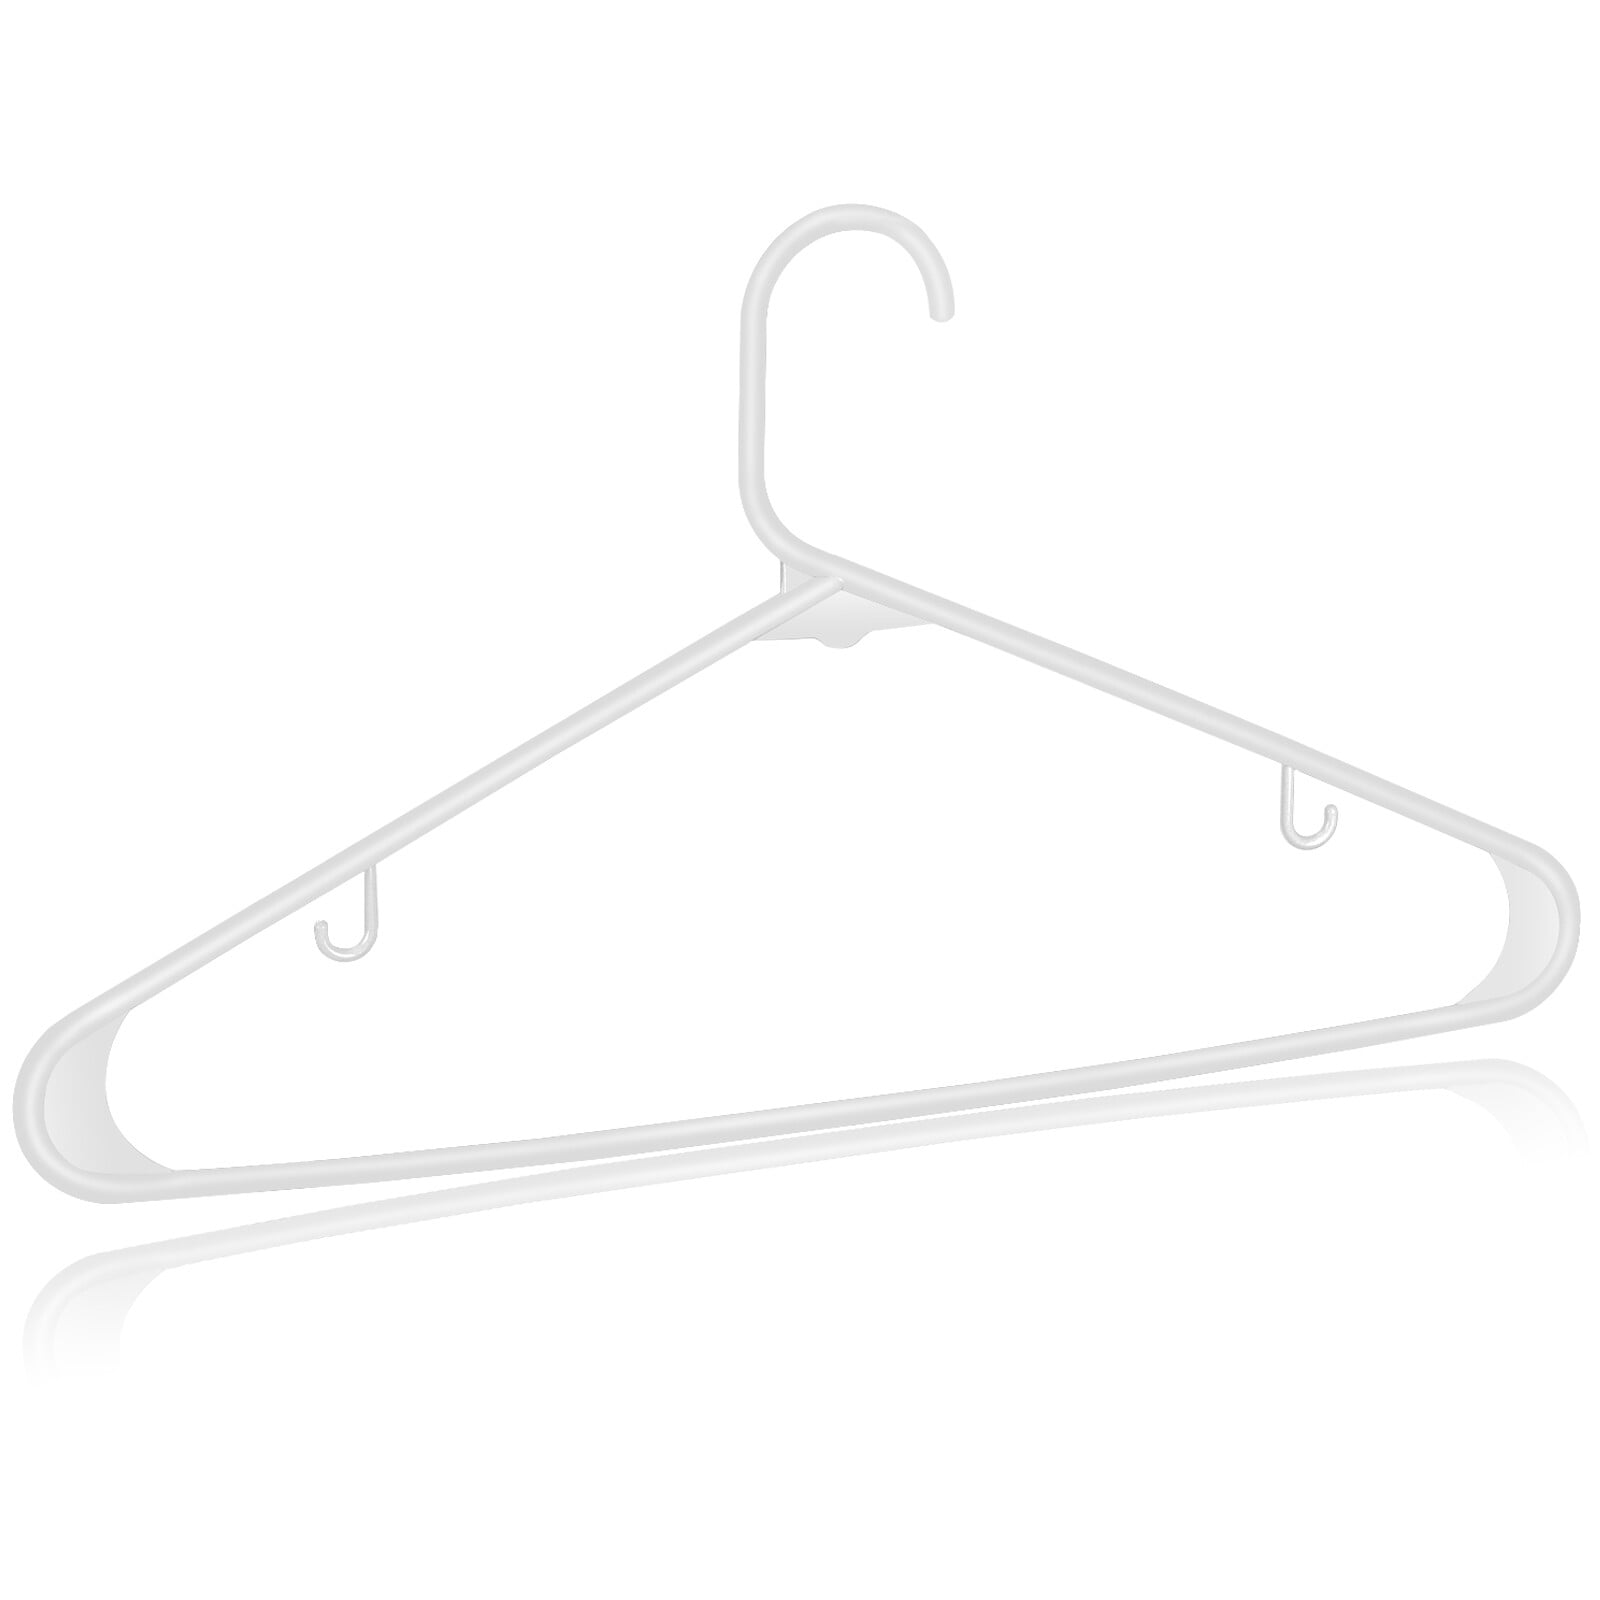 USA Made Super Heavy Duty White Plastic Hangers Pack of 24 Clothes Hangers  with Hook for Scarves, Belts, Straps - Clothing, Suit, and Coat Hangers for